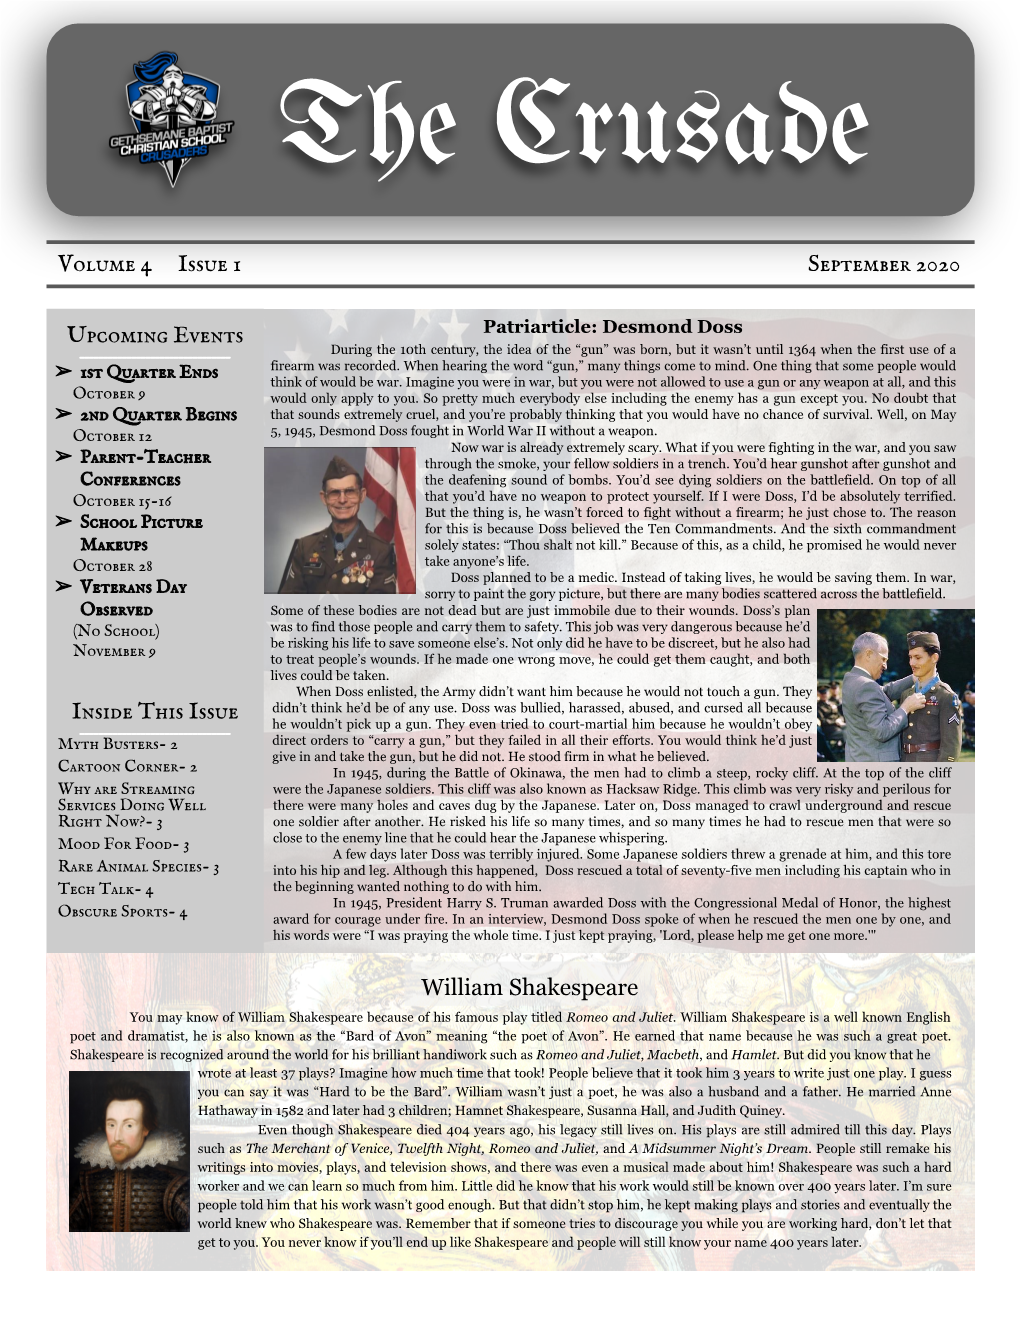 Upcoming Events Inside This Issue Volume 4 Issue 1 September 2020 William Shakespeare